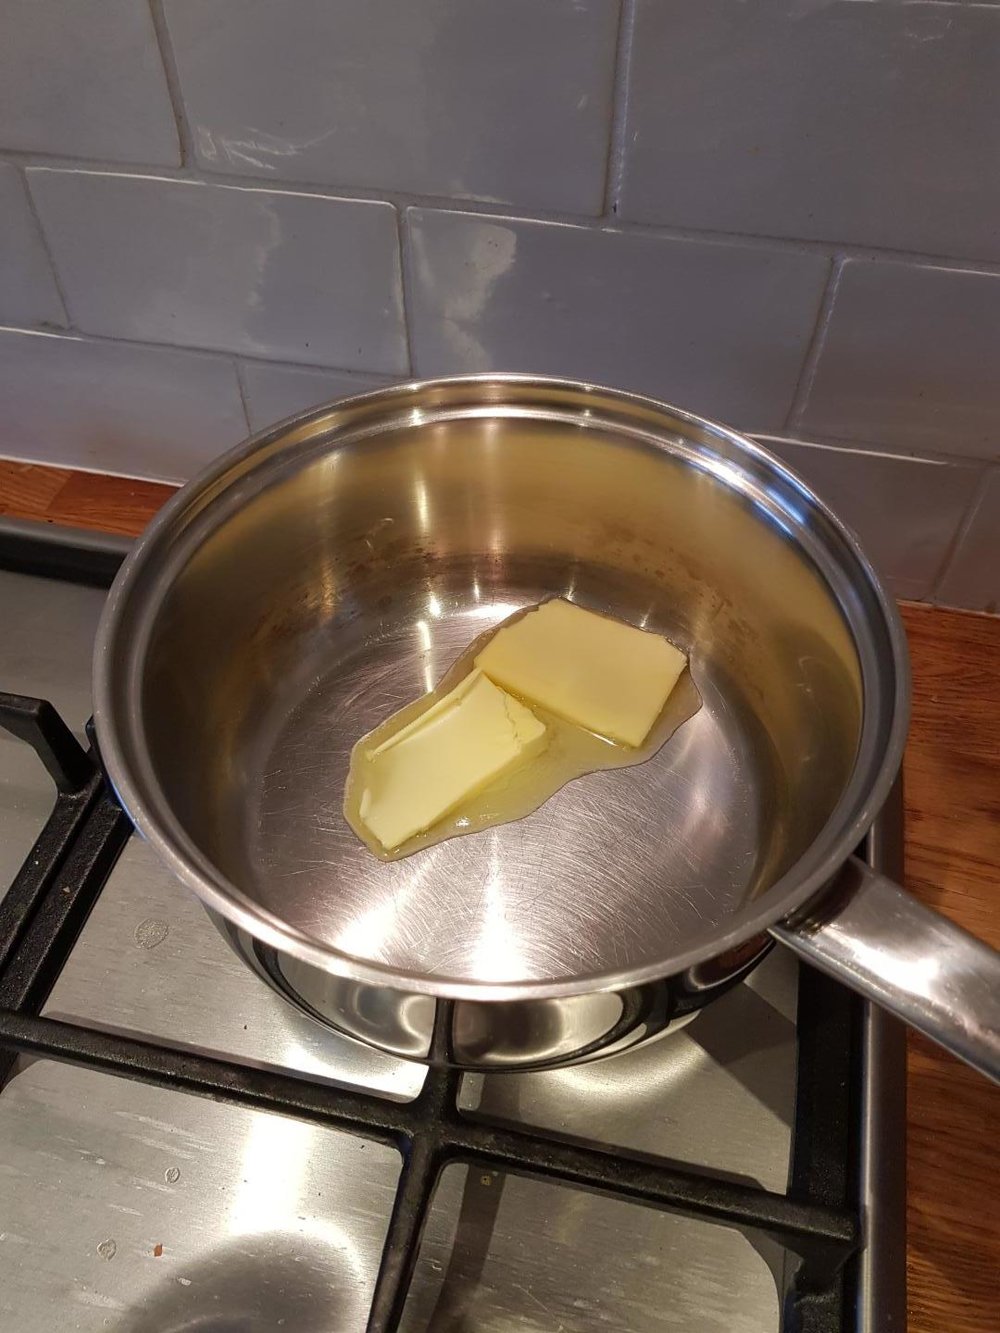  1: Put a knob of butter in the pan. 